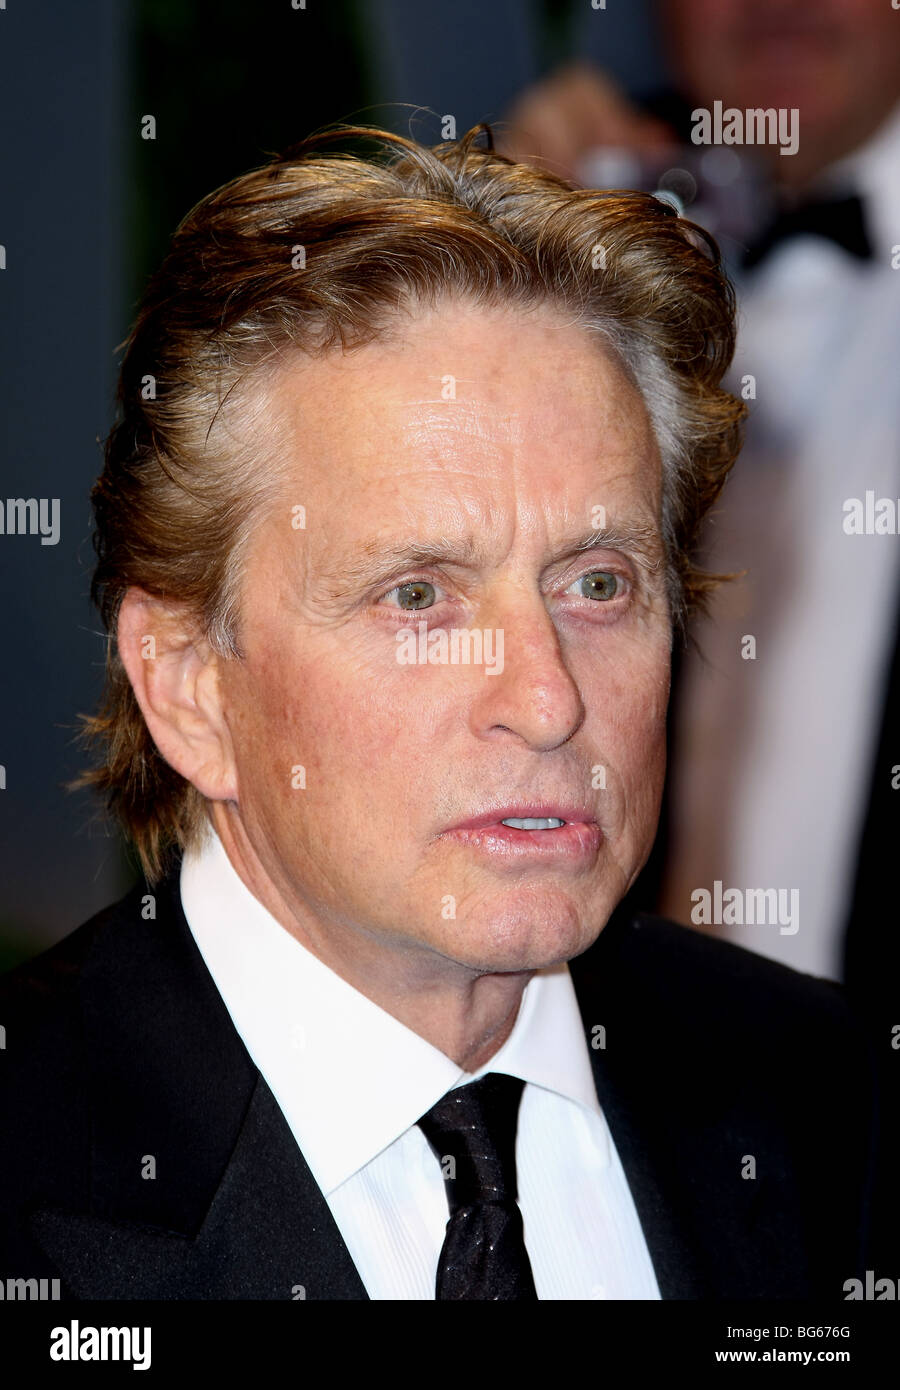 MICHAEL DOUGLAS ACTOR WEST HOLLYWOOD  LOS ANGELES  CA  USA 22/02/2009 Stock Photo